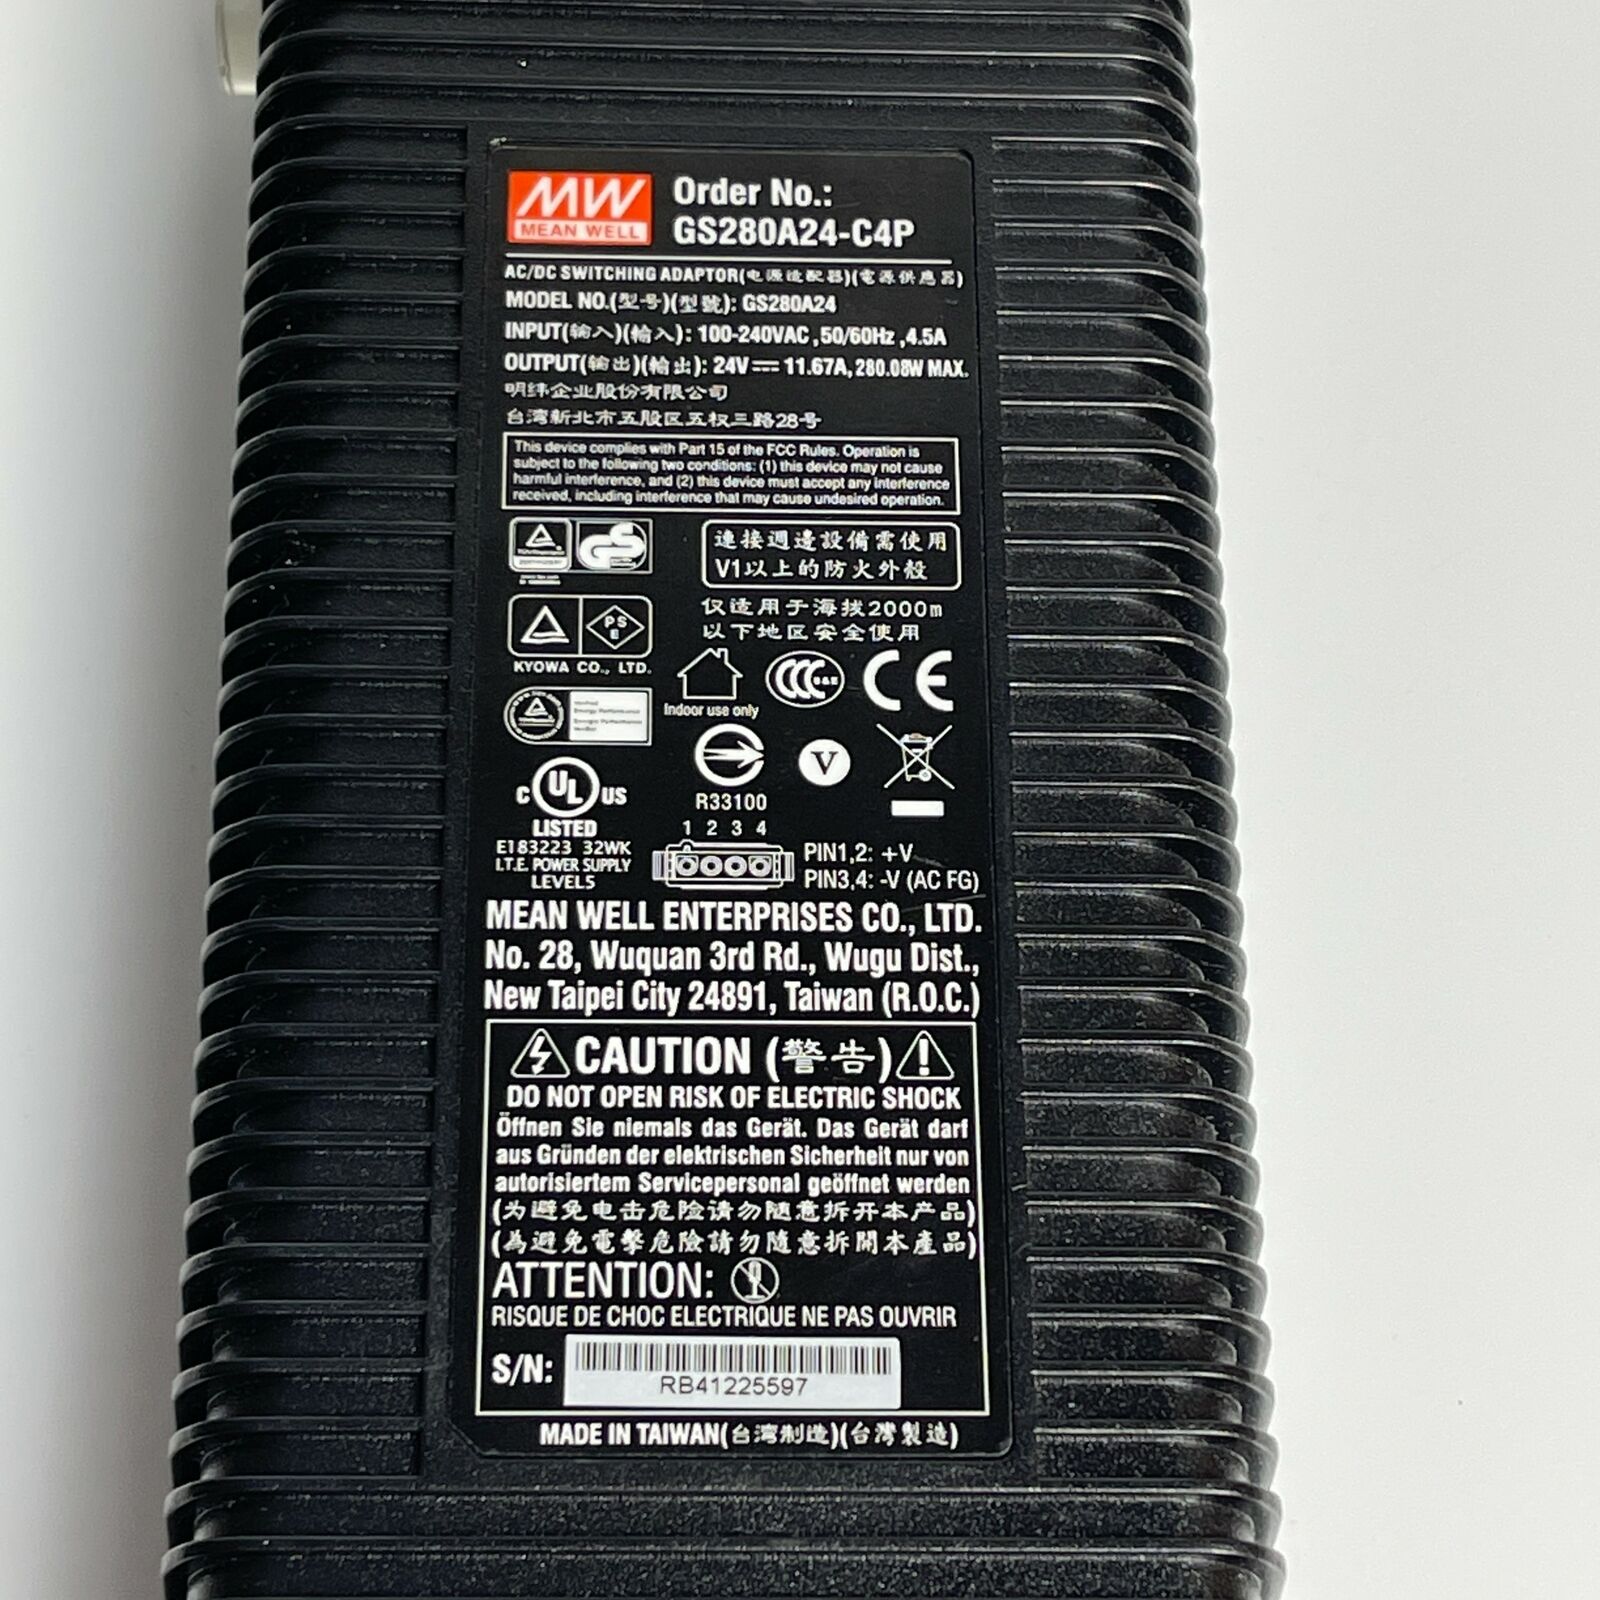 New In Box MEAN WELL GS280A24-C4P Power Adapter 24V 11.67A 280.08W Brand: MEAN WELL MPN: 3TB41220XQ0 Model: 3TB41